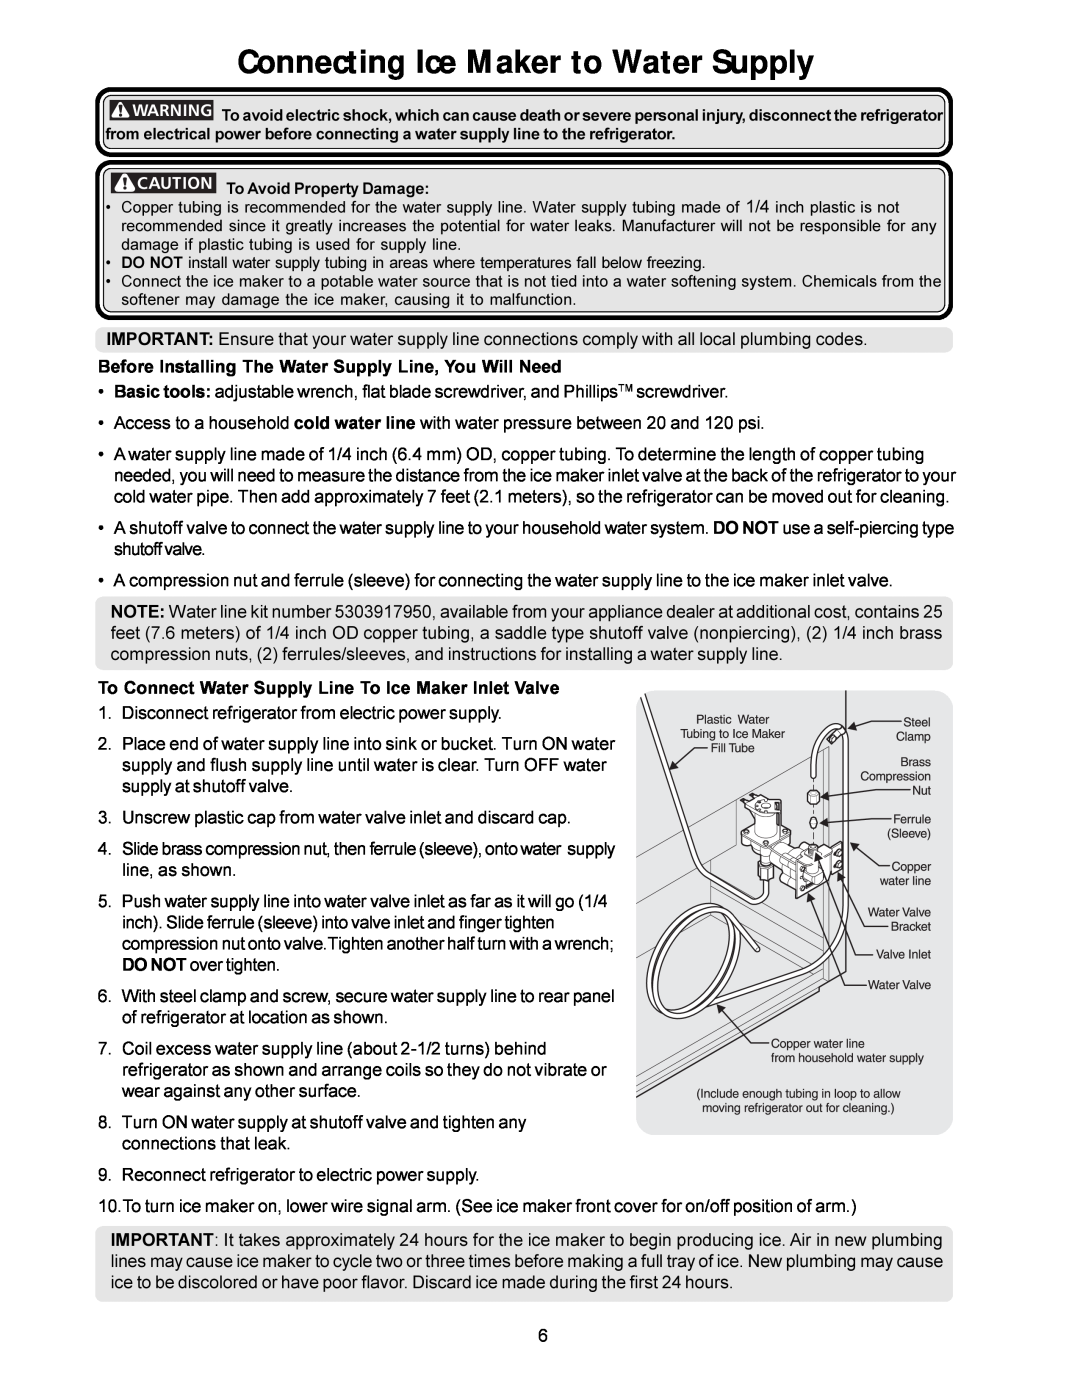 Frigidaire IM115 installation instructions Connecting Ice Maker to Water Supply 